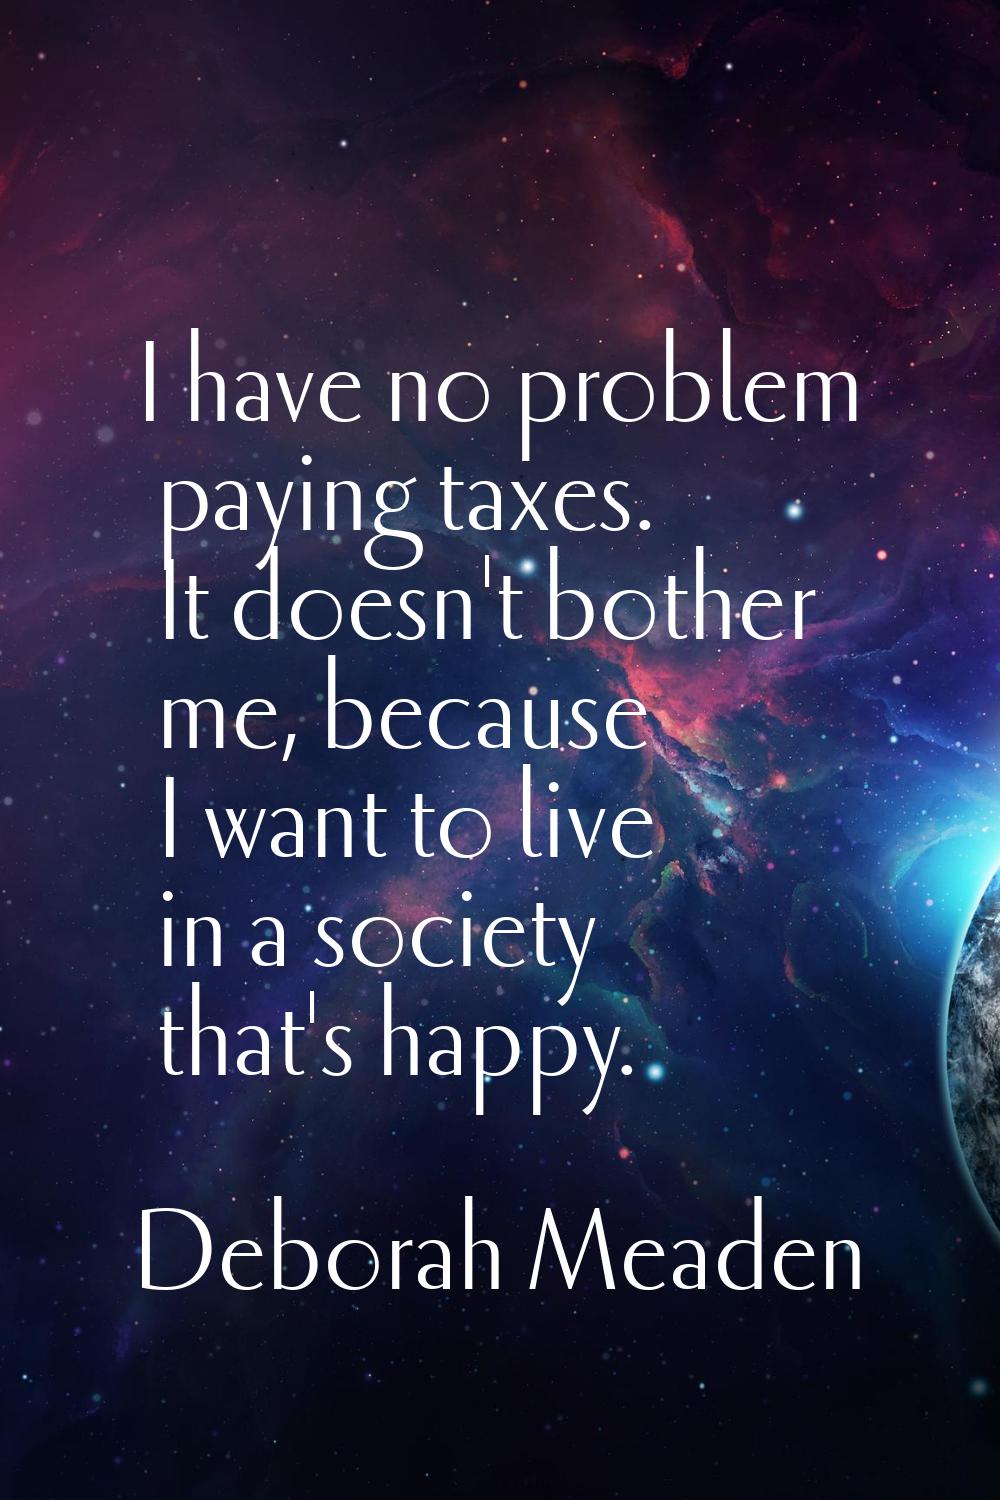 I have no problem paying taxes. It doesn't bother me, because I want to live in a society that's ha